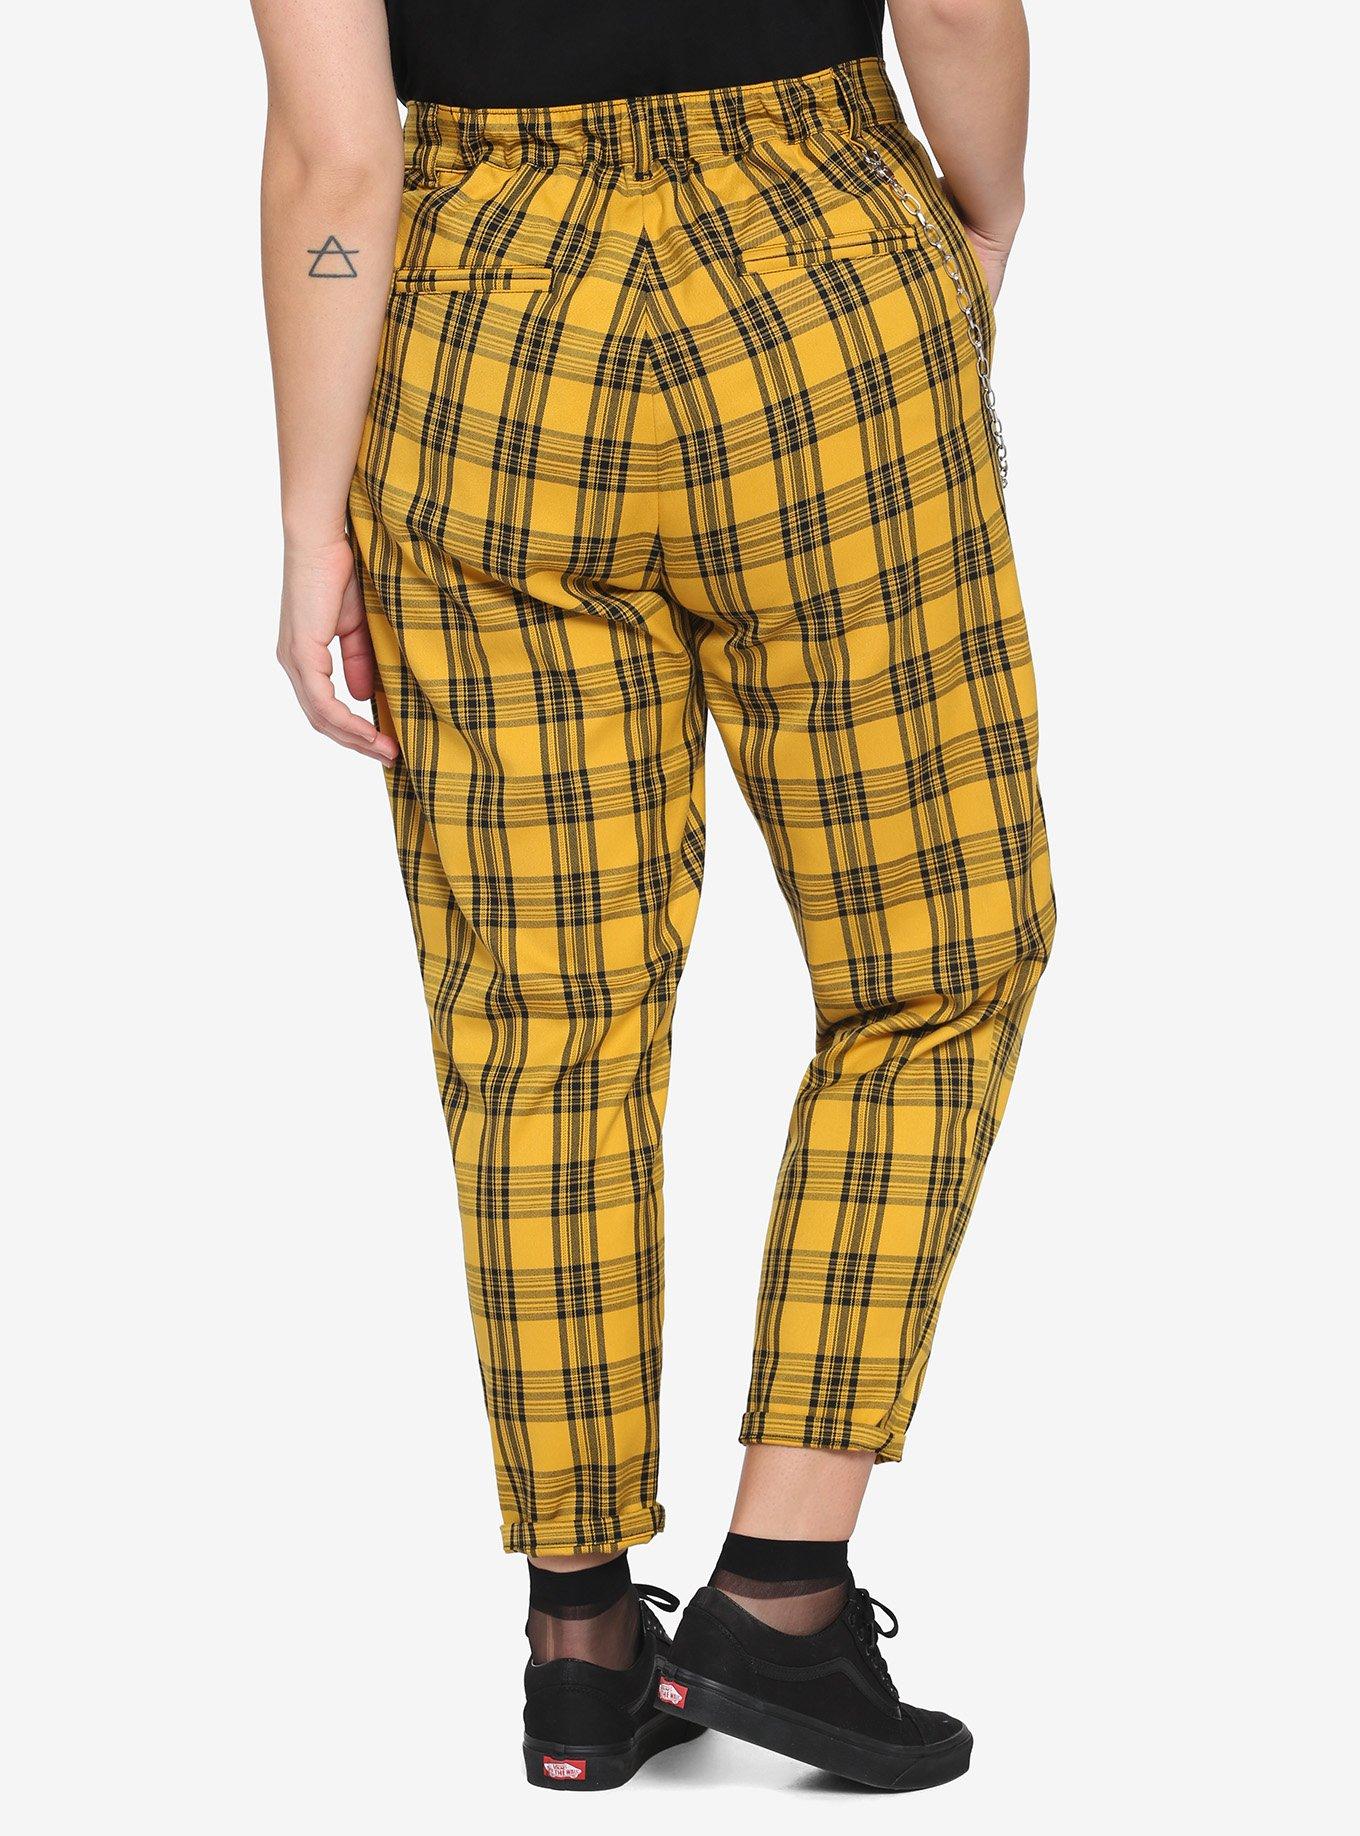 Hot Topic Plaid Yellow Casual Pants Size 1X (1) (Plus) - 34% off